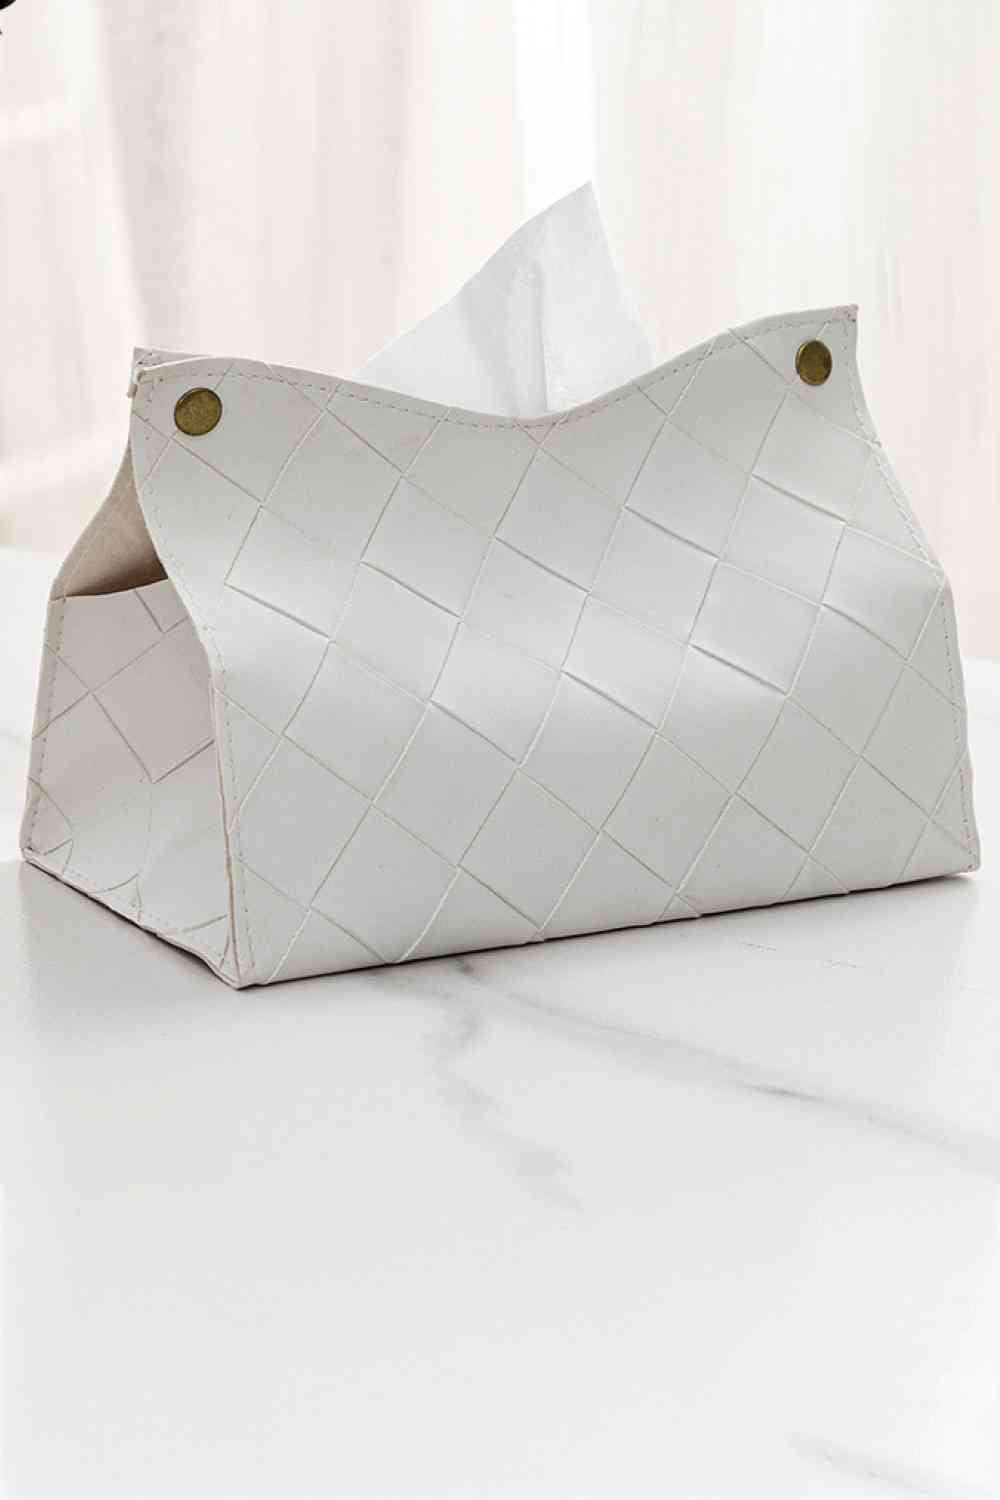 Tissue Box Covers-SHIPS DIRECTLY TO YOU!